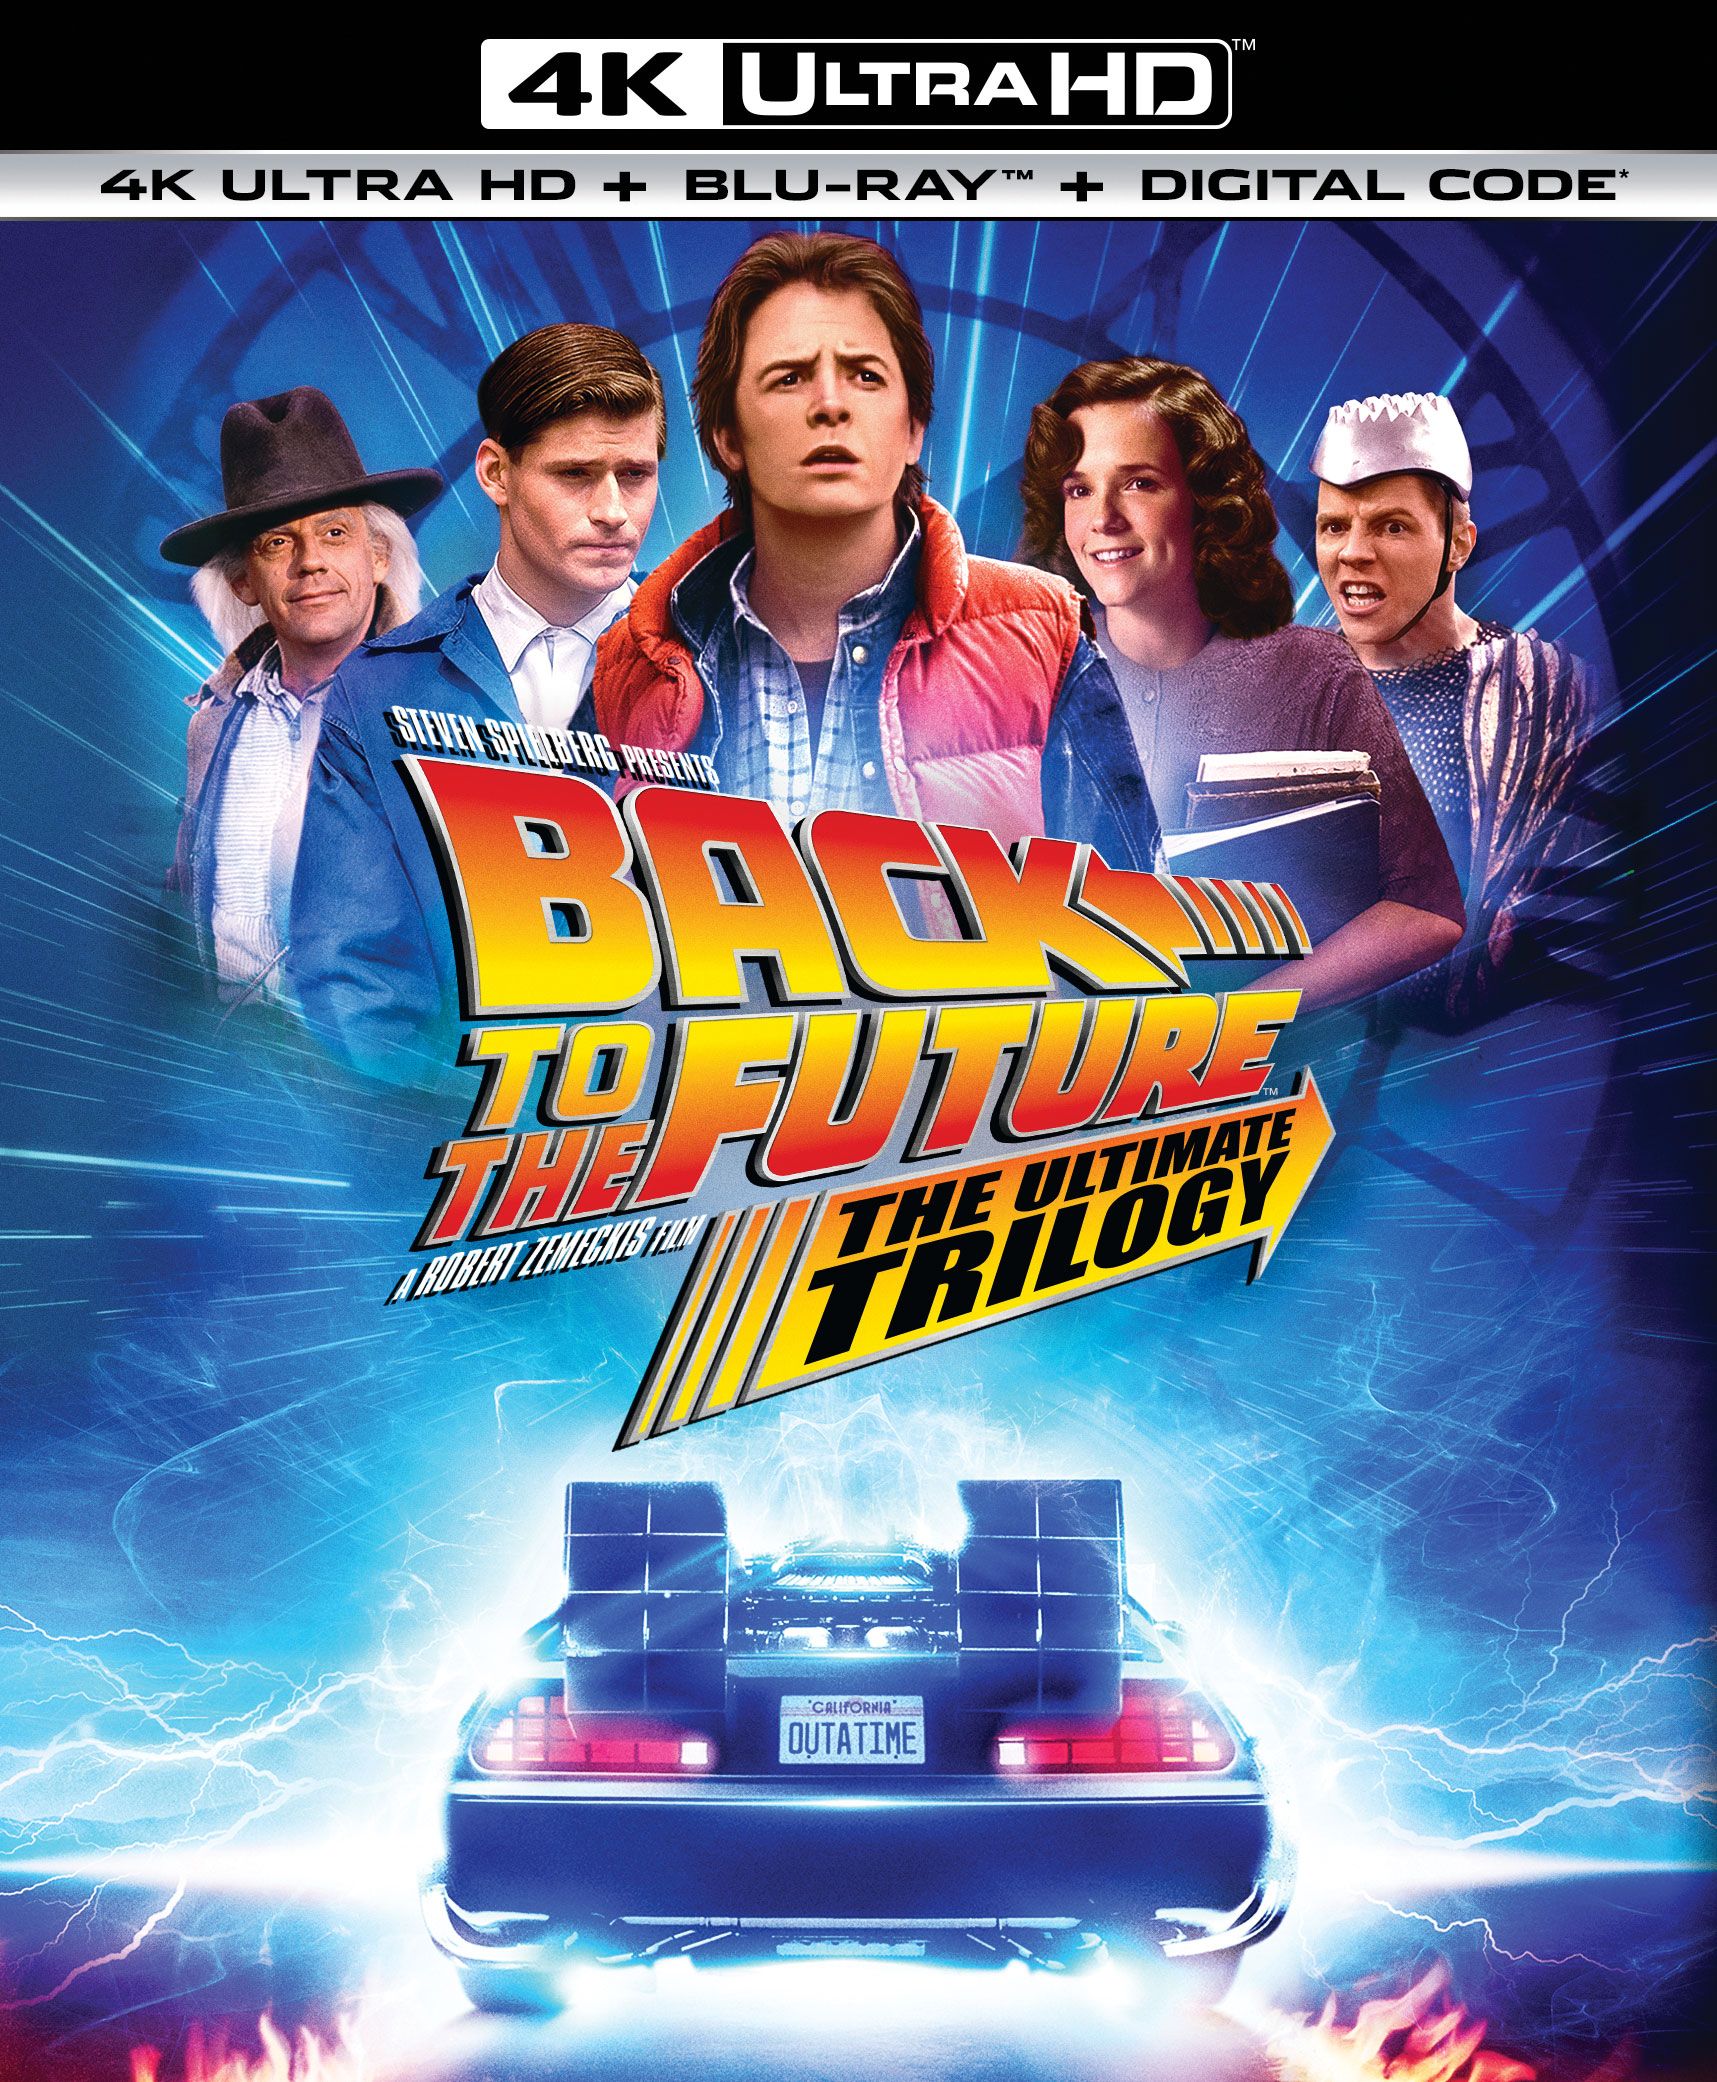 Back to the Future 4K Ultimate Trilogy Blu-ray